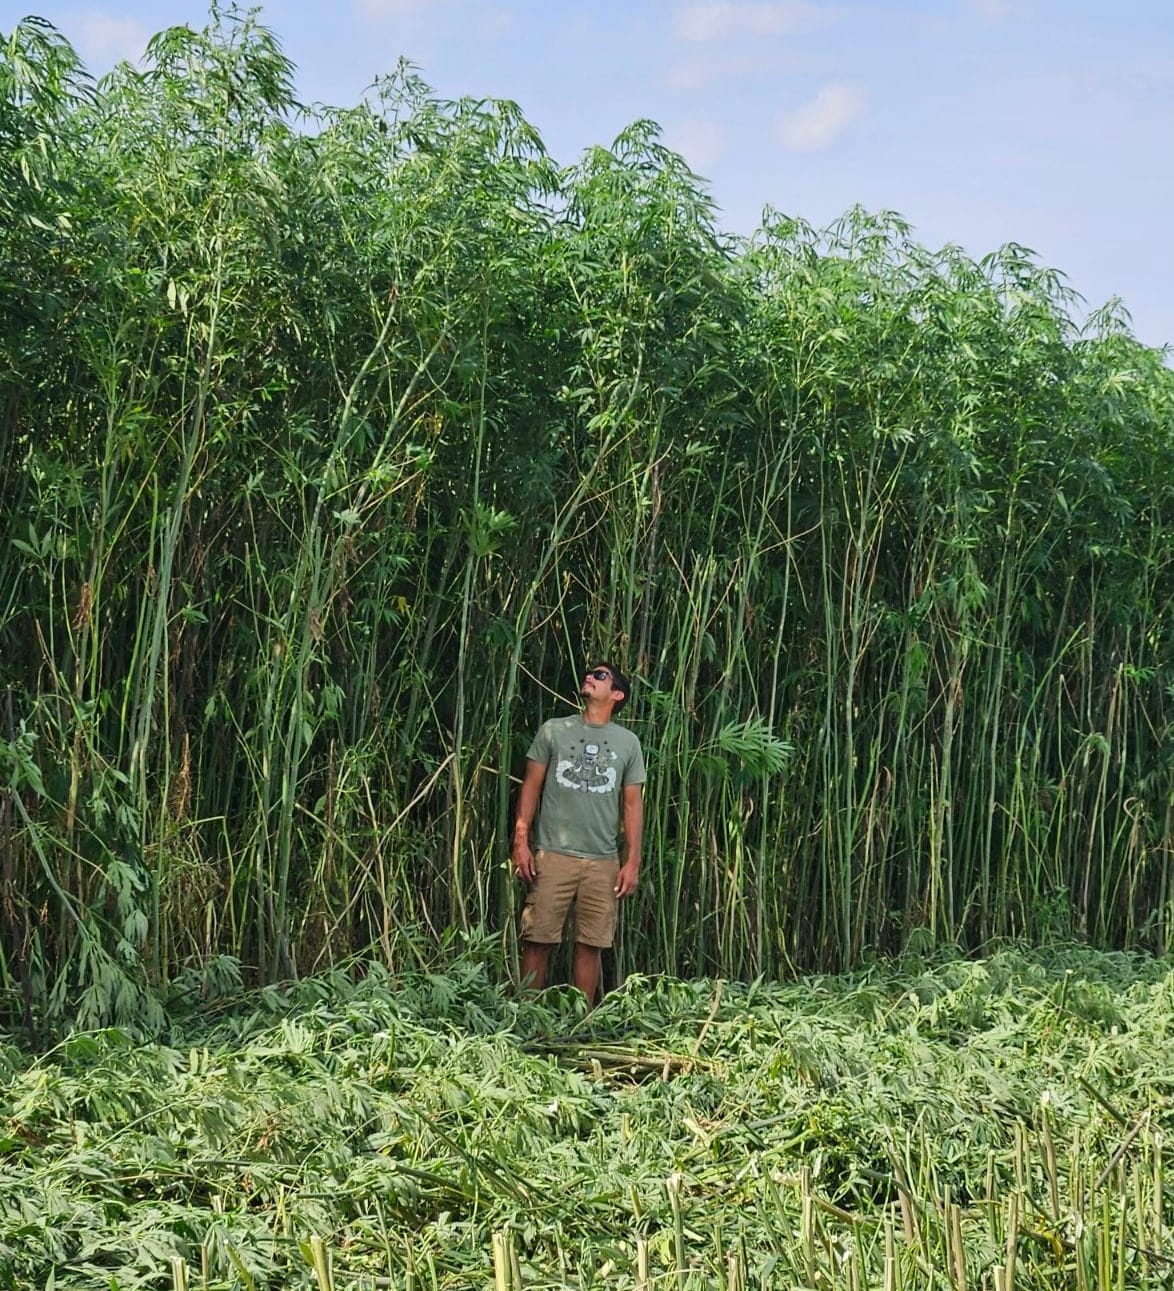 South Dakota No. 1 state in nation for hemp production